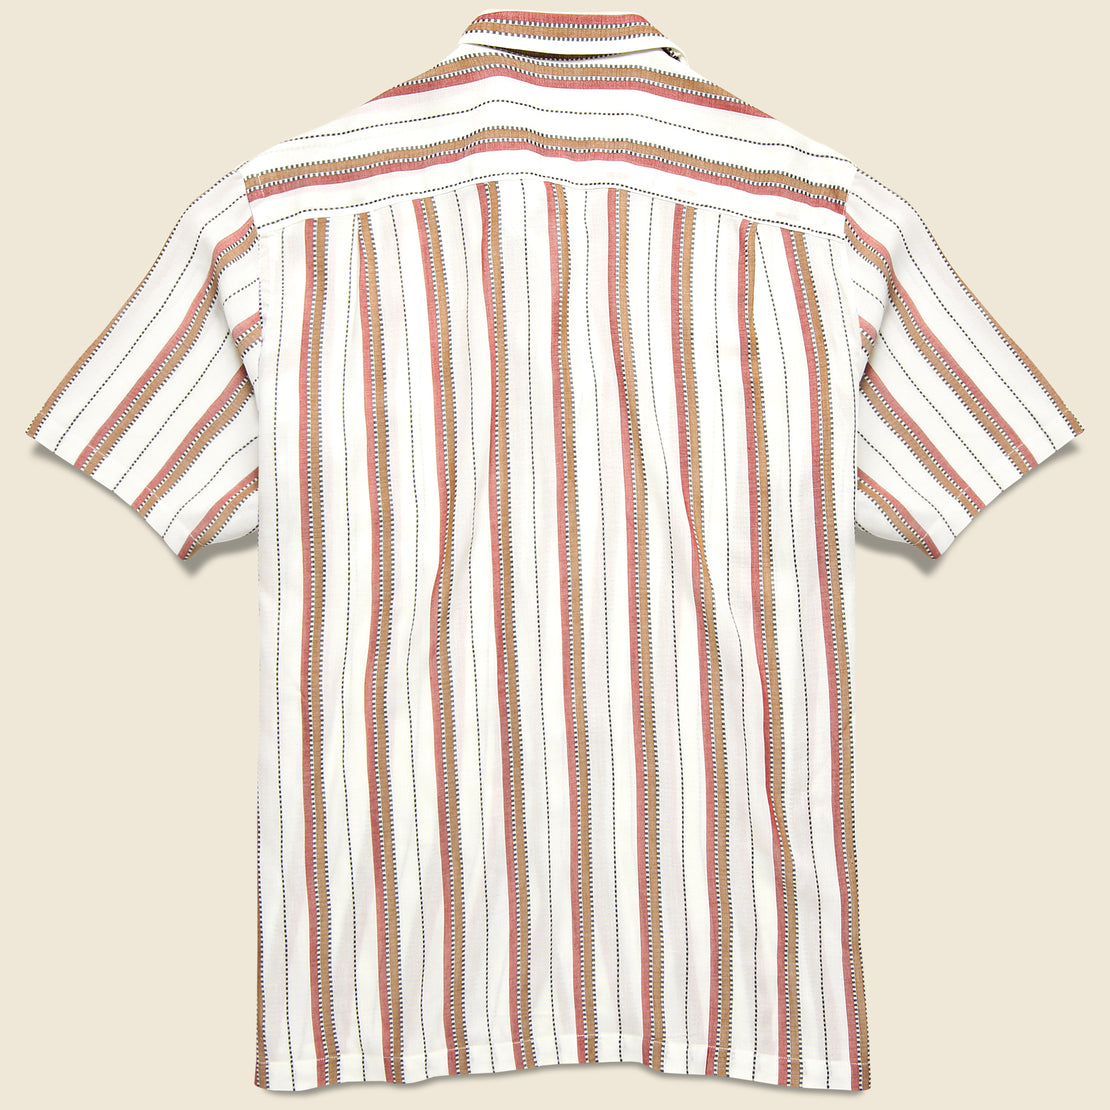 Bava Camp Shirt - Brick Red - Portuguese Flannel - STAG Provisions - Tops - S/S Woven - Stripe